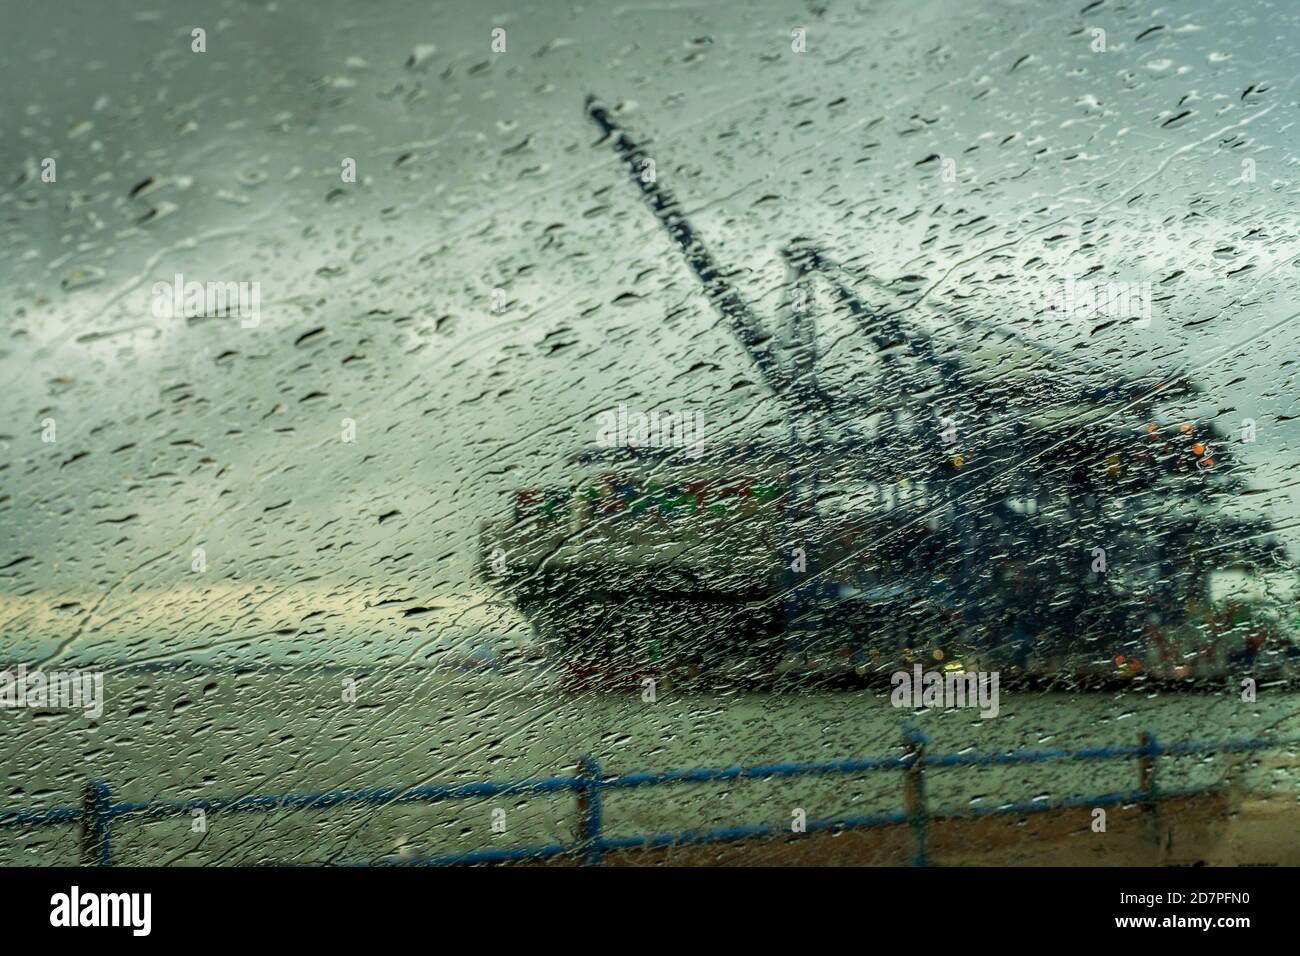 Any Port in a storm - A container ship is unloaded during a rainstorm at the Port of Felixstowe, the UK's largest container port. Stormy Trade Talks. Stock Photo